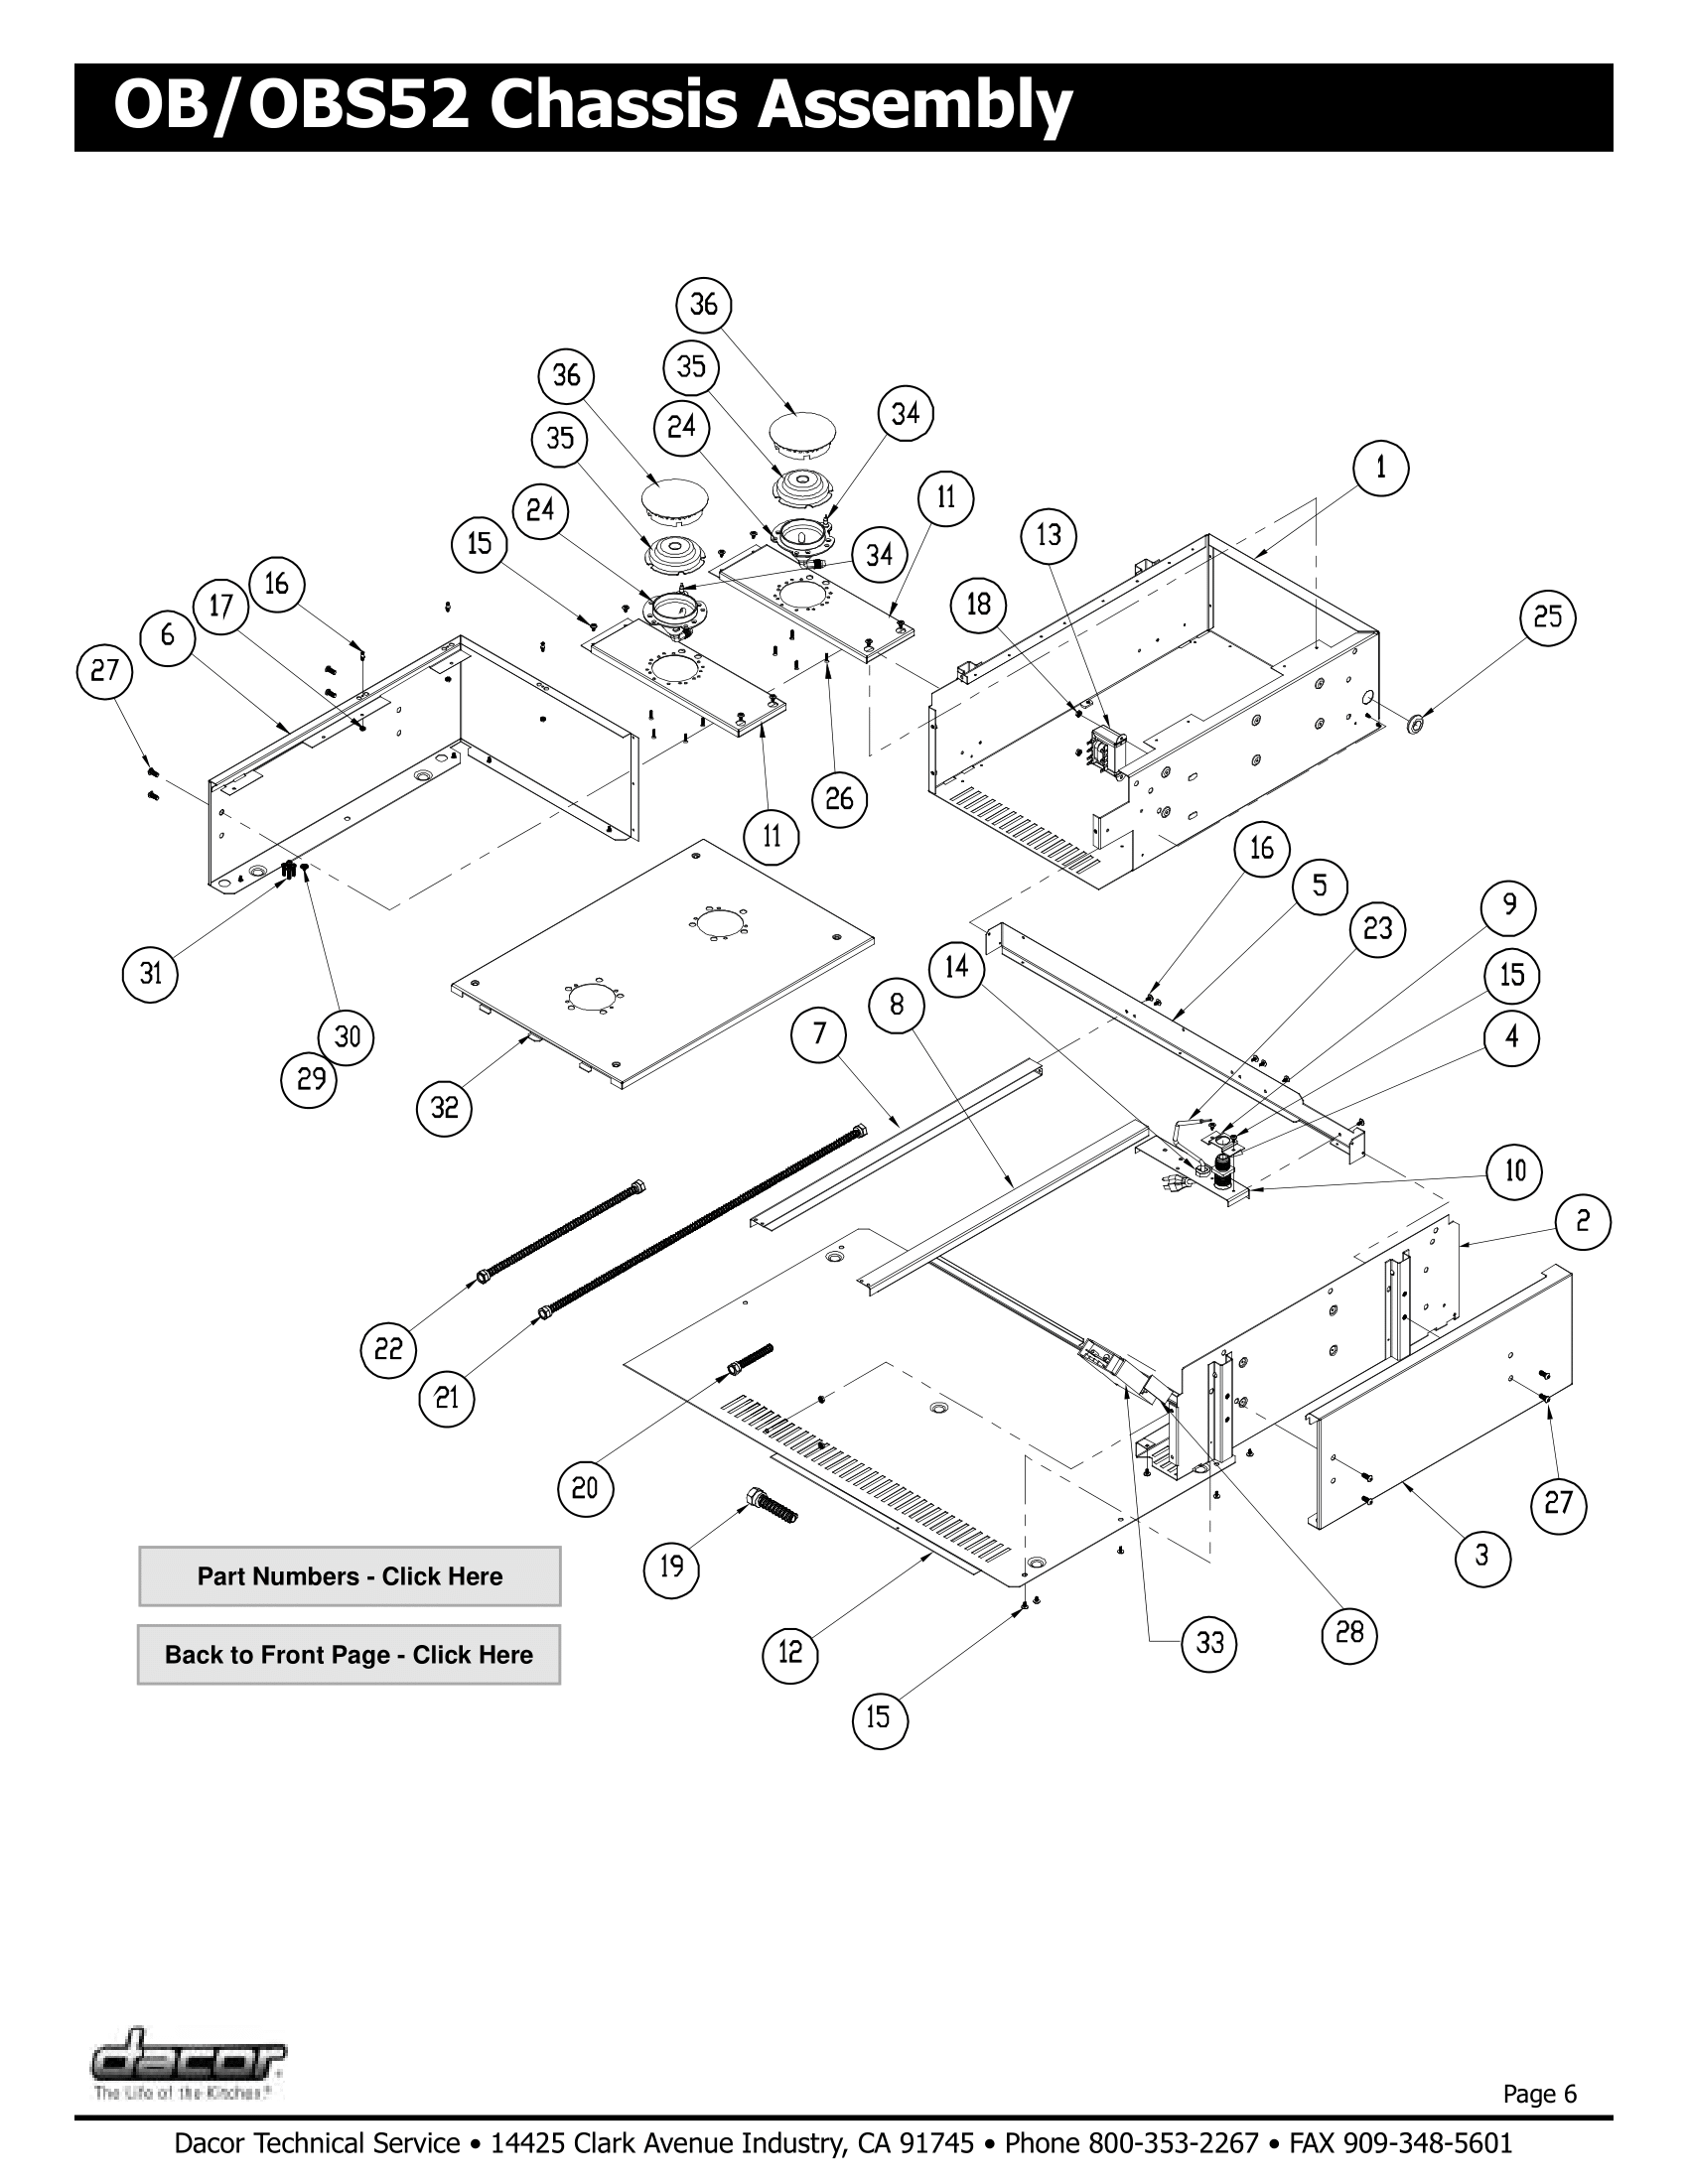 Dacor OBS52 Chassis Assembly Schematic